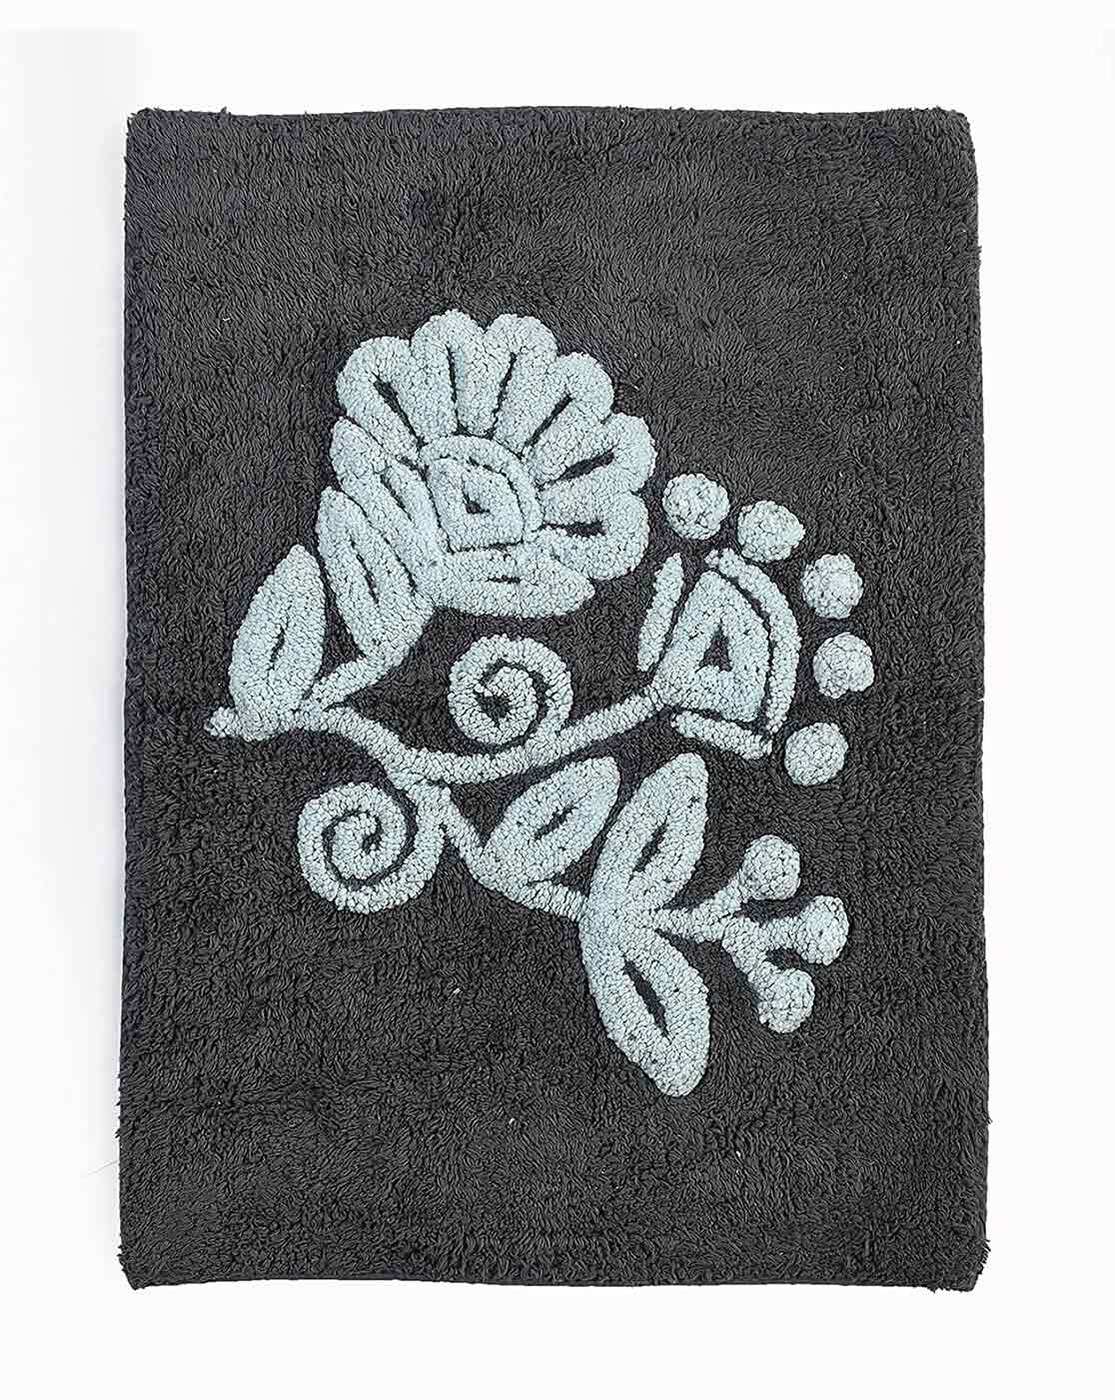 Buy Grey Bath Mats for Home & Kitchen by Saral Home Online